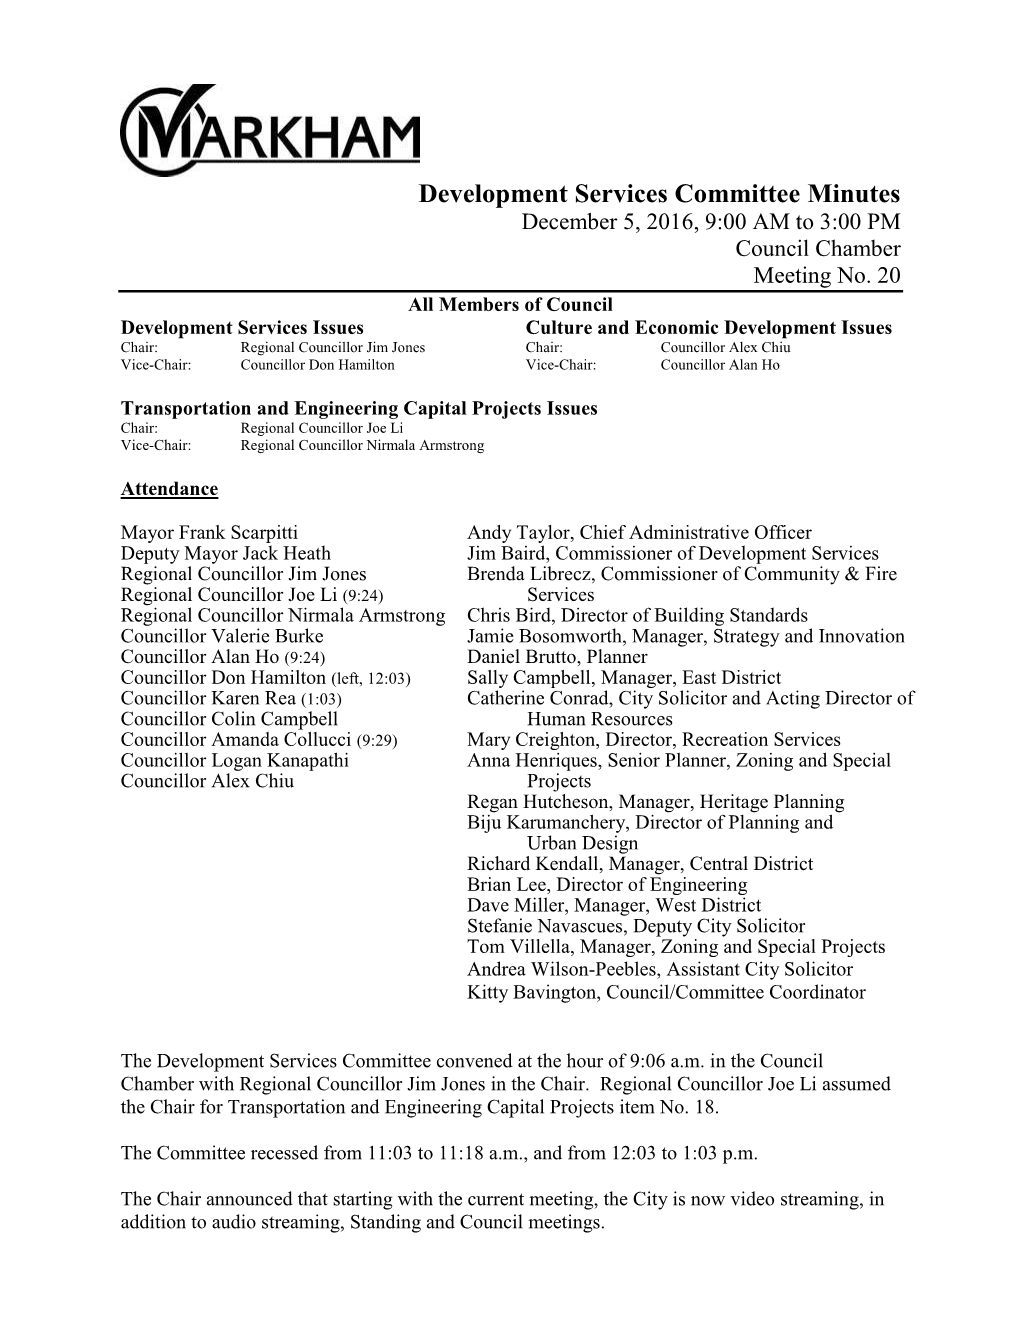 Development Services Committee Minutes December 5, 2016, 9:00 AM to 3:00 PM Council Chamber Meeting No